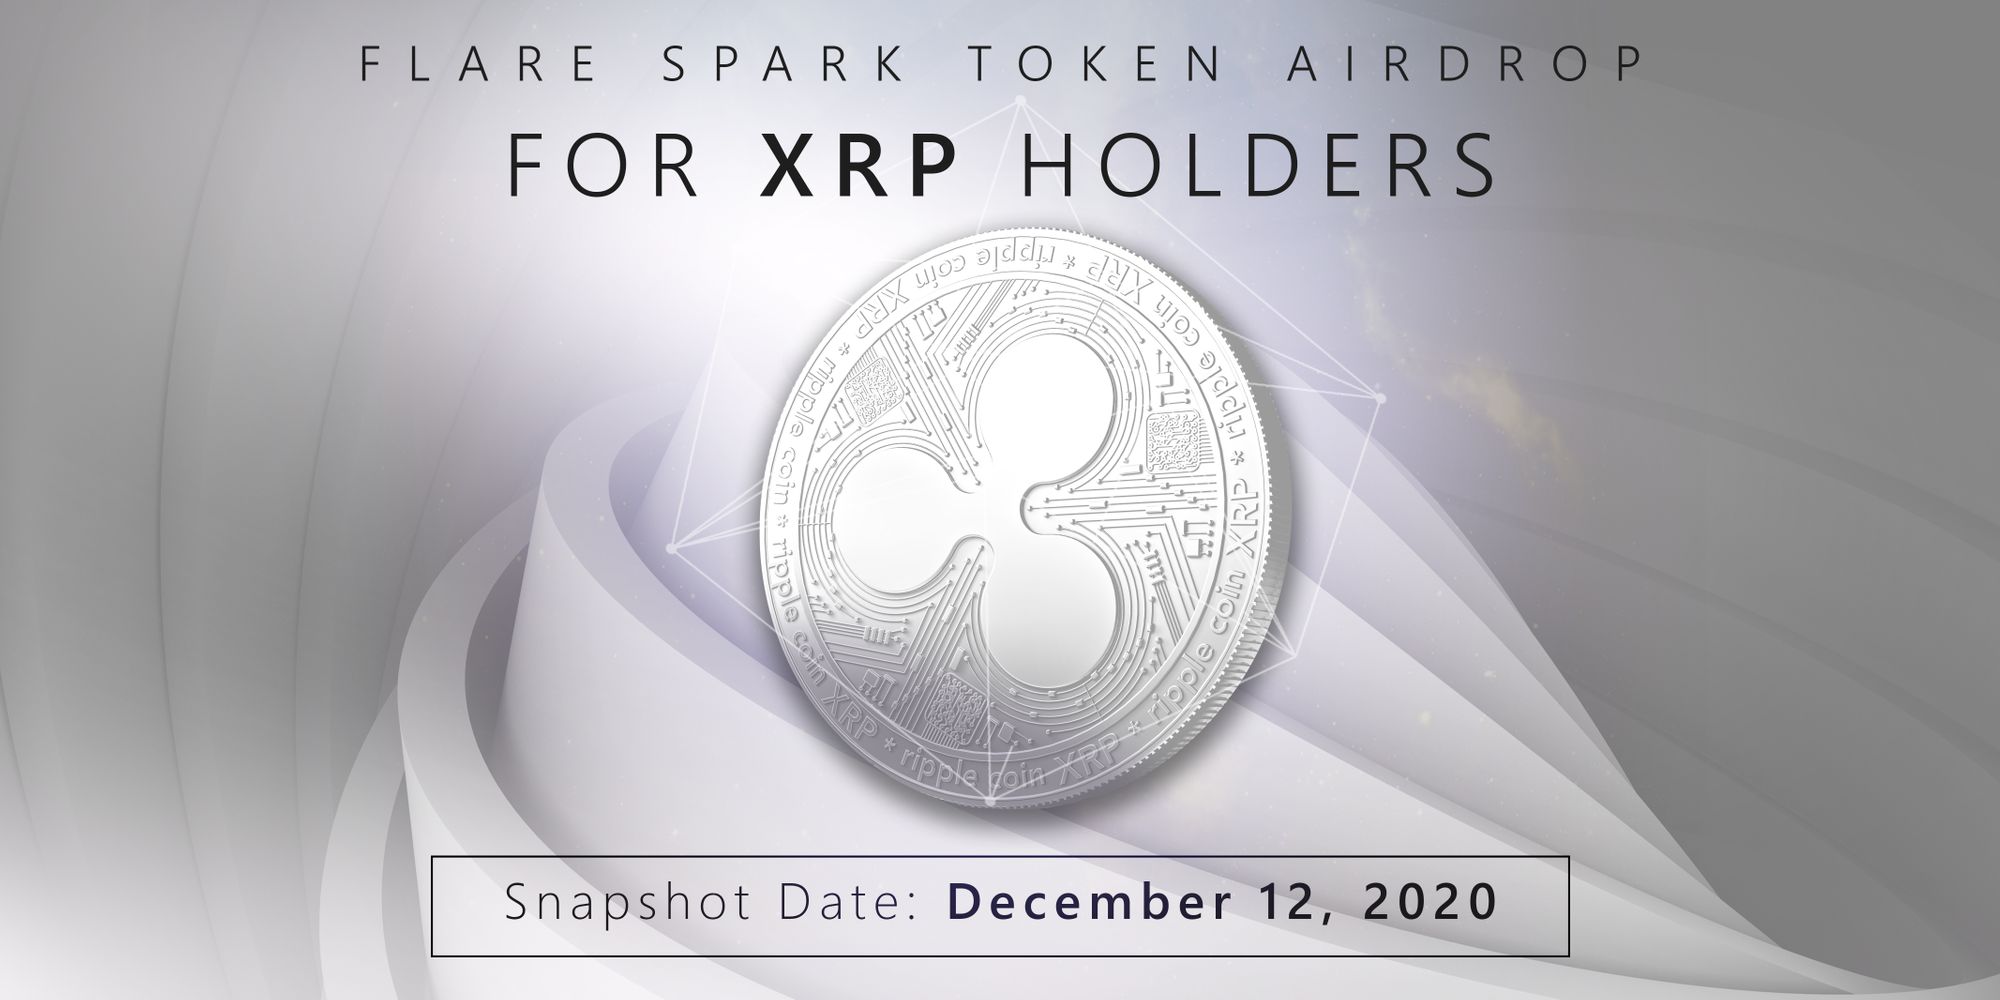 How Canadian XRP holders can participate in the flare spark airdrop